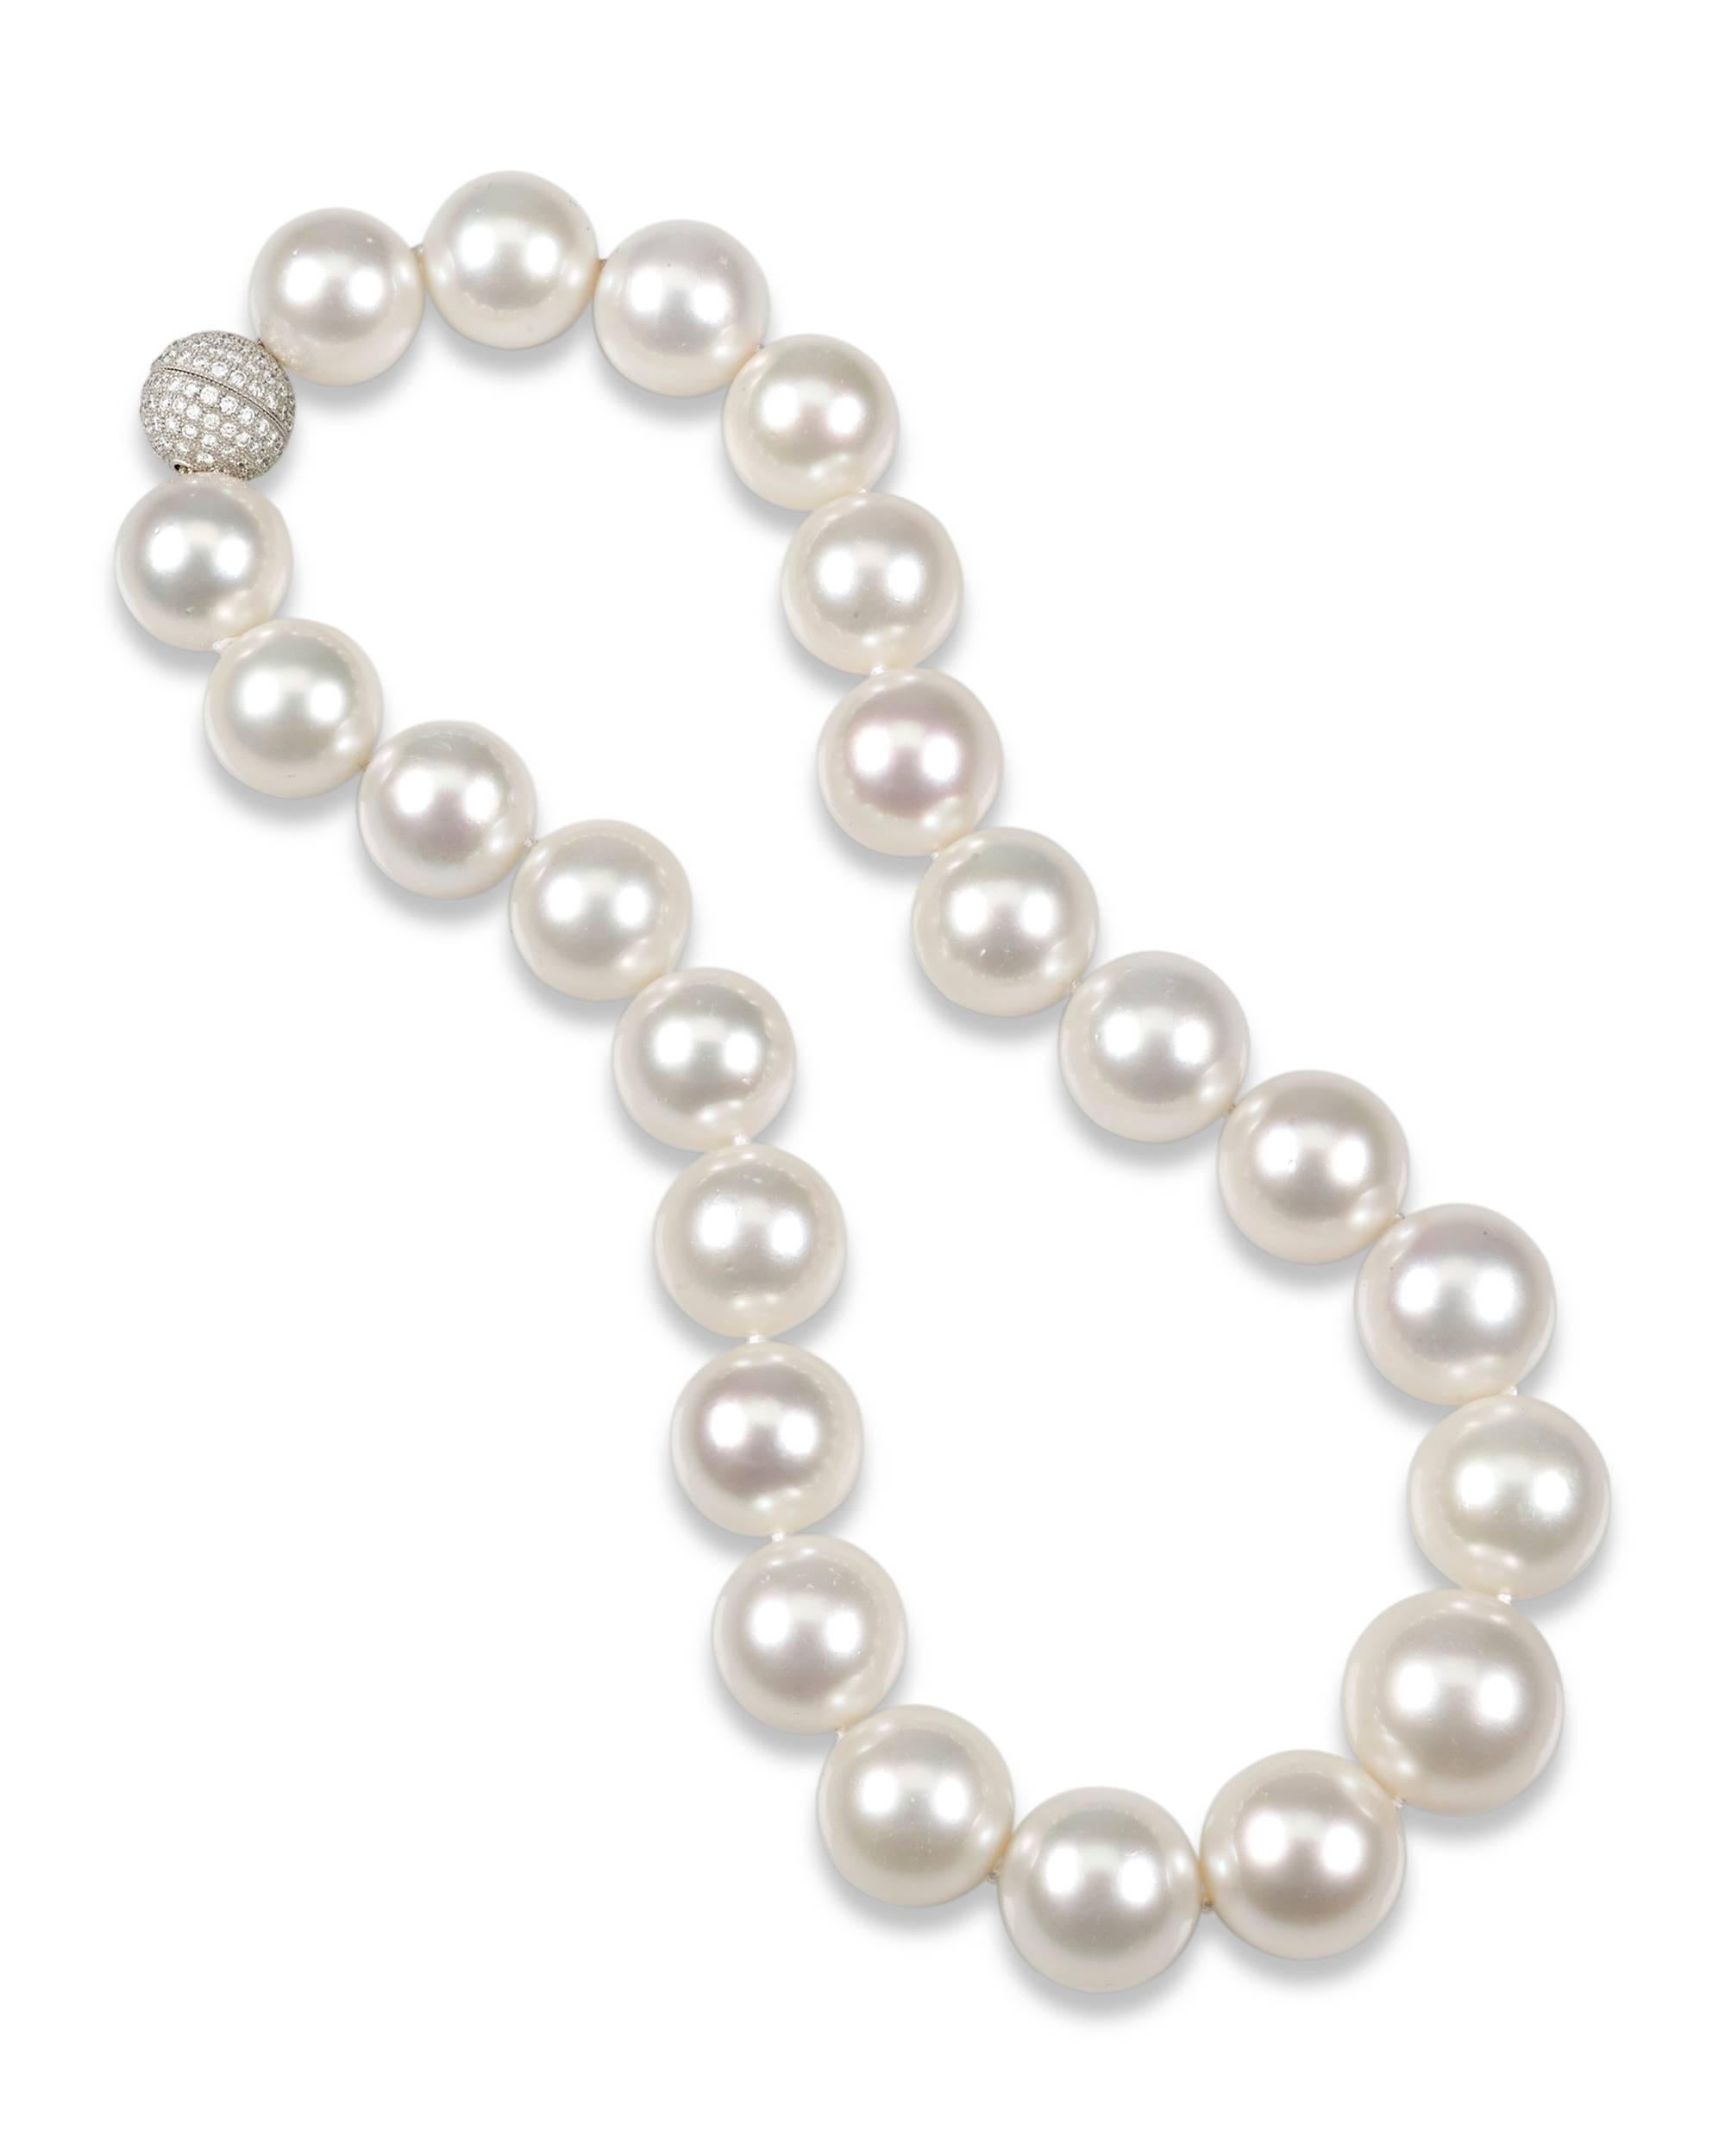 Twenty-three remarkably rare, lustrous white South Sea pearls exude elegance and refinement in this classic necklace. Measuring between an incredible 17 to 20.3 mm, these perfectly matched, graduated pearls are among the largest in the world. Most